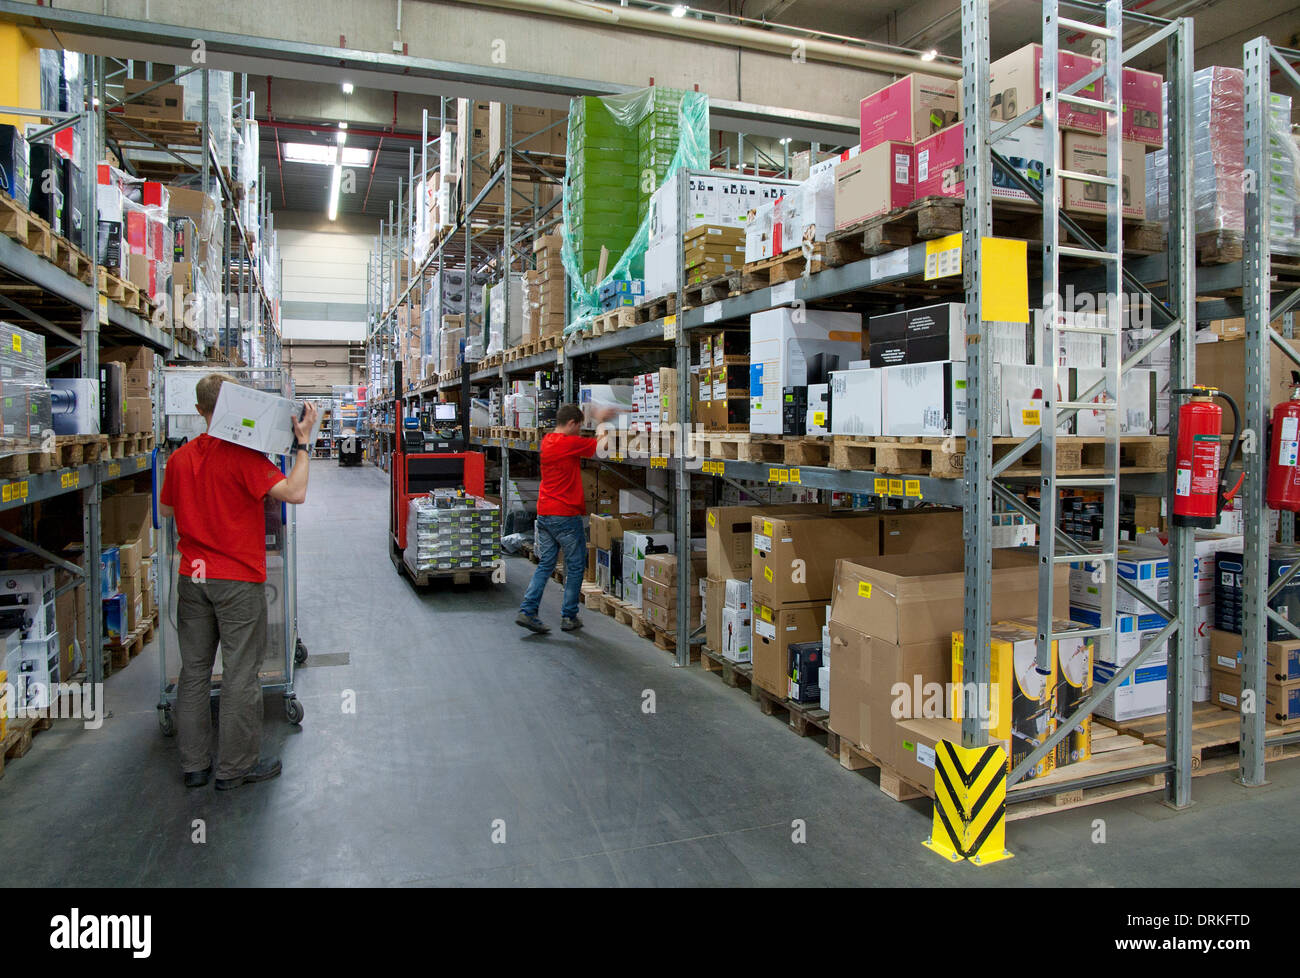 Workers in a warehouse Stock Photo